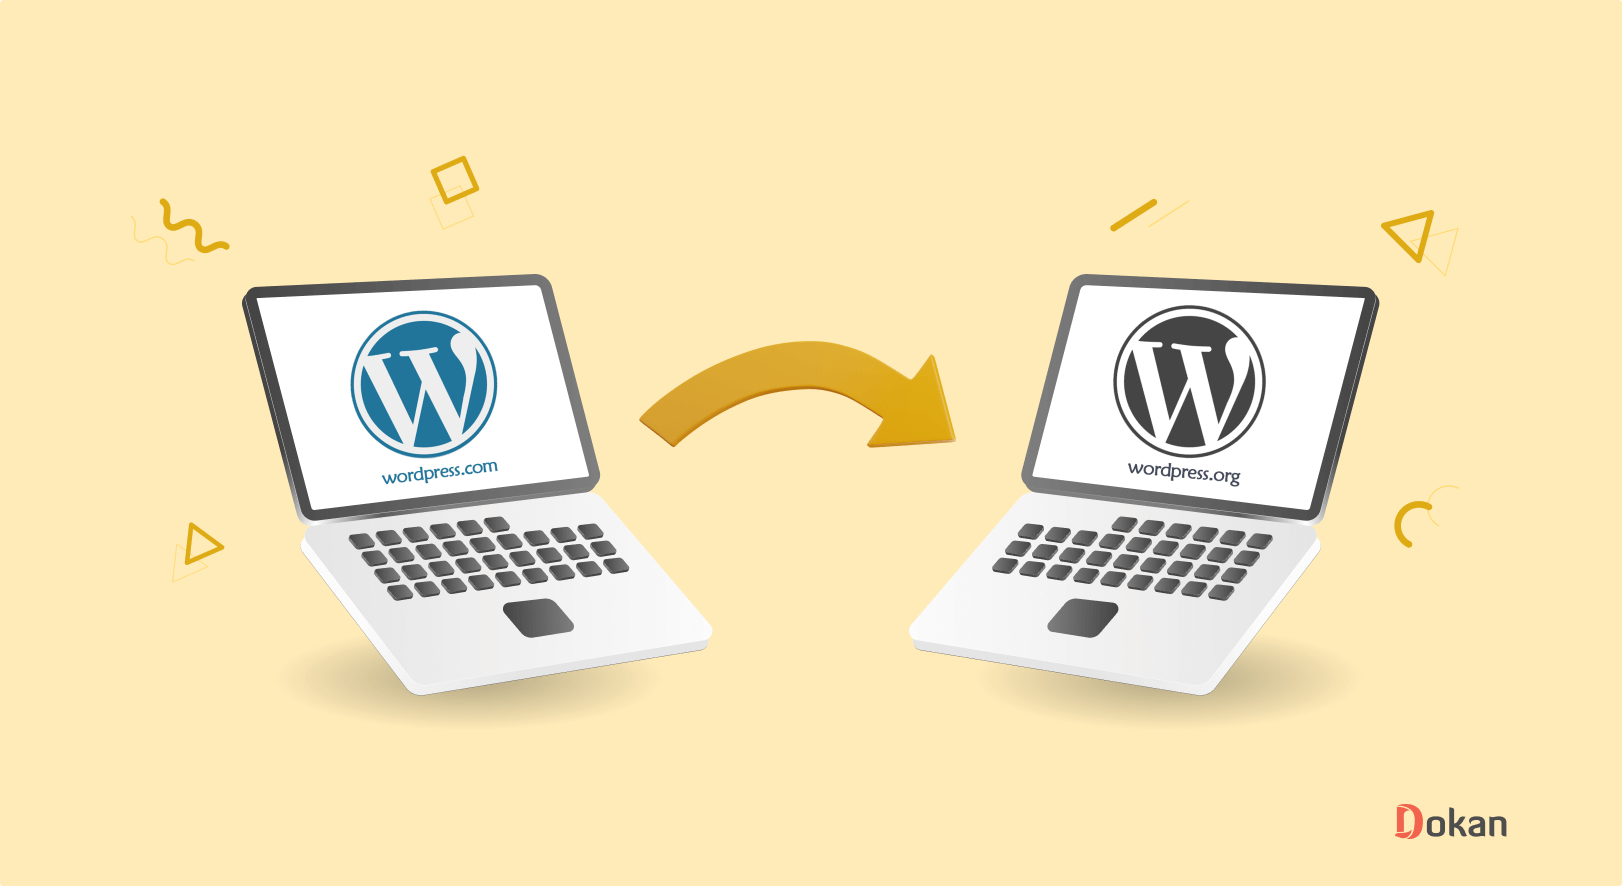 6 Easy Steps to Move Your Site from WordPress.com to WordPress.org